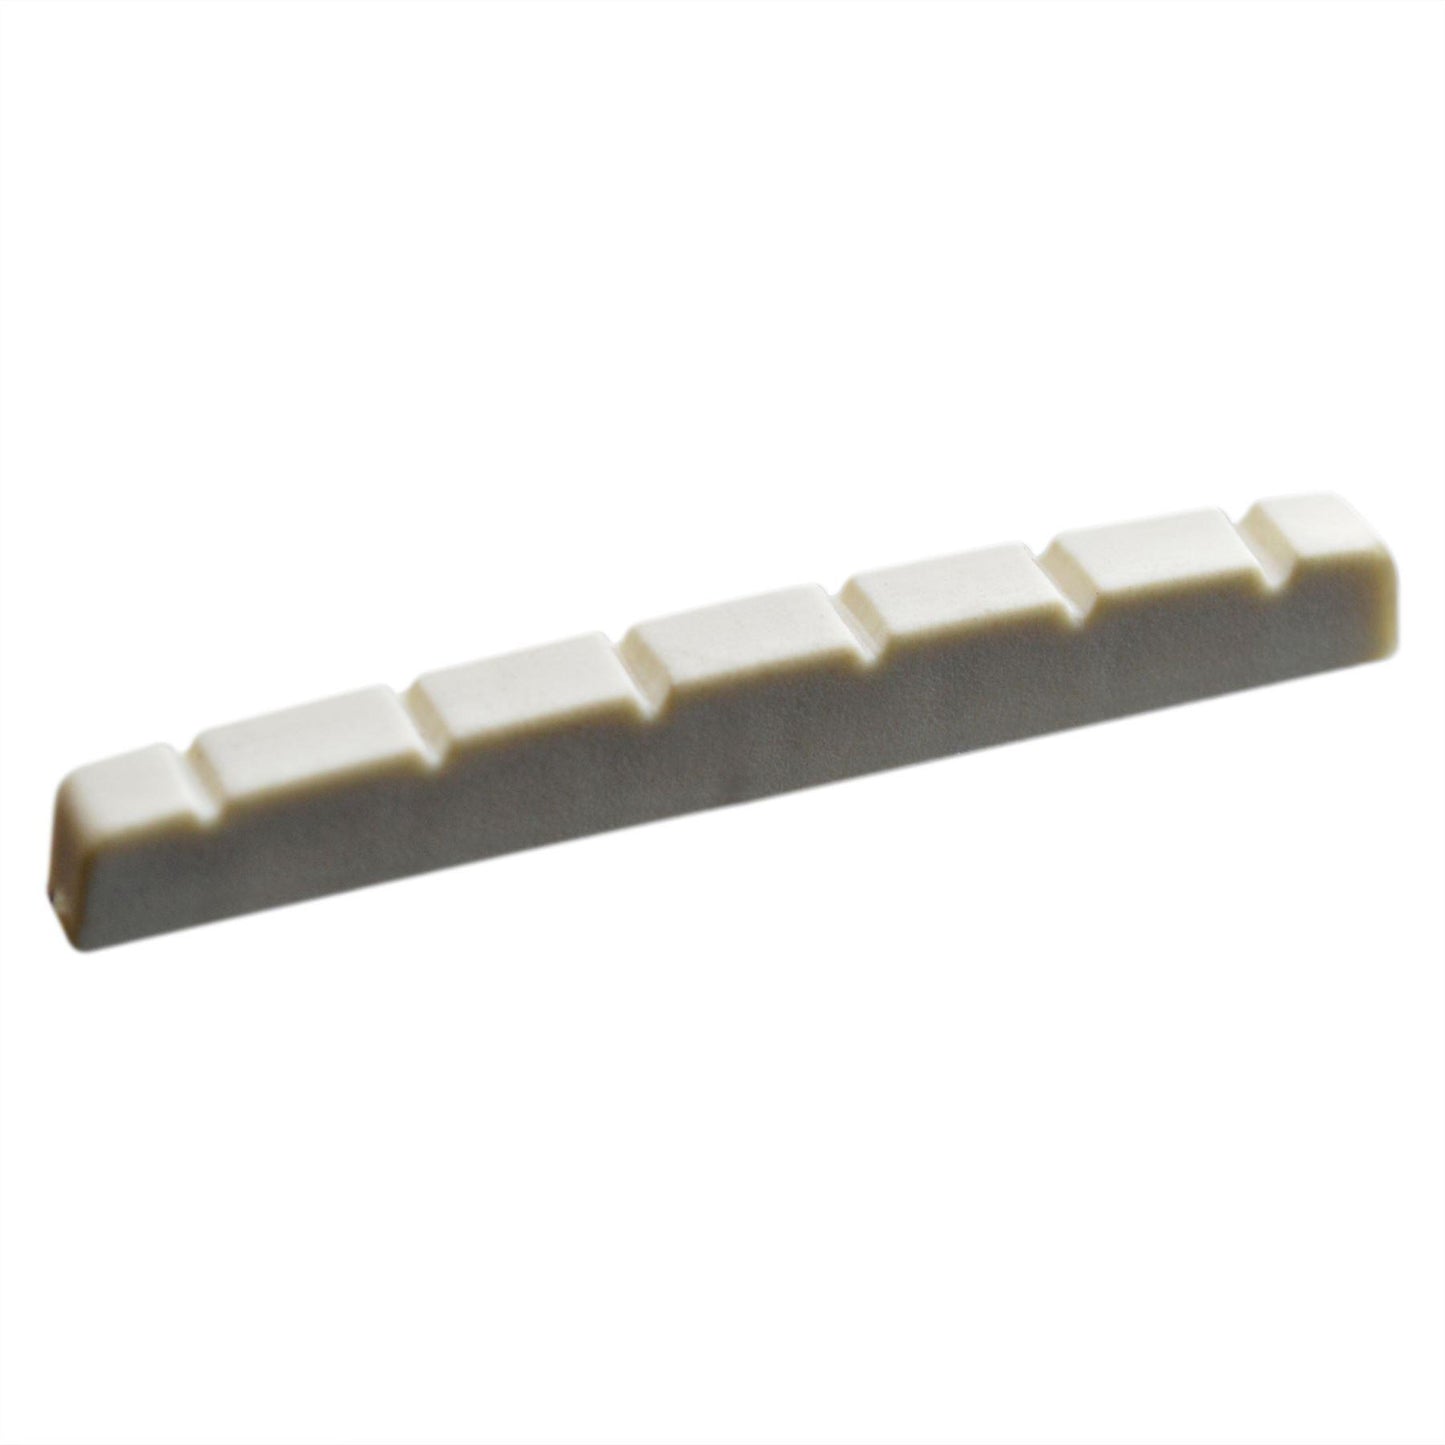 Resin Electric Guitar Nut - 43mm x 6mm